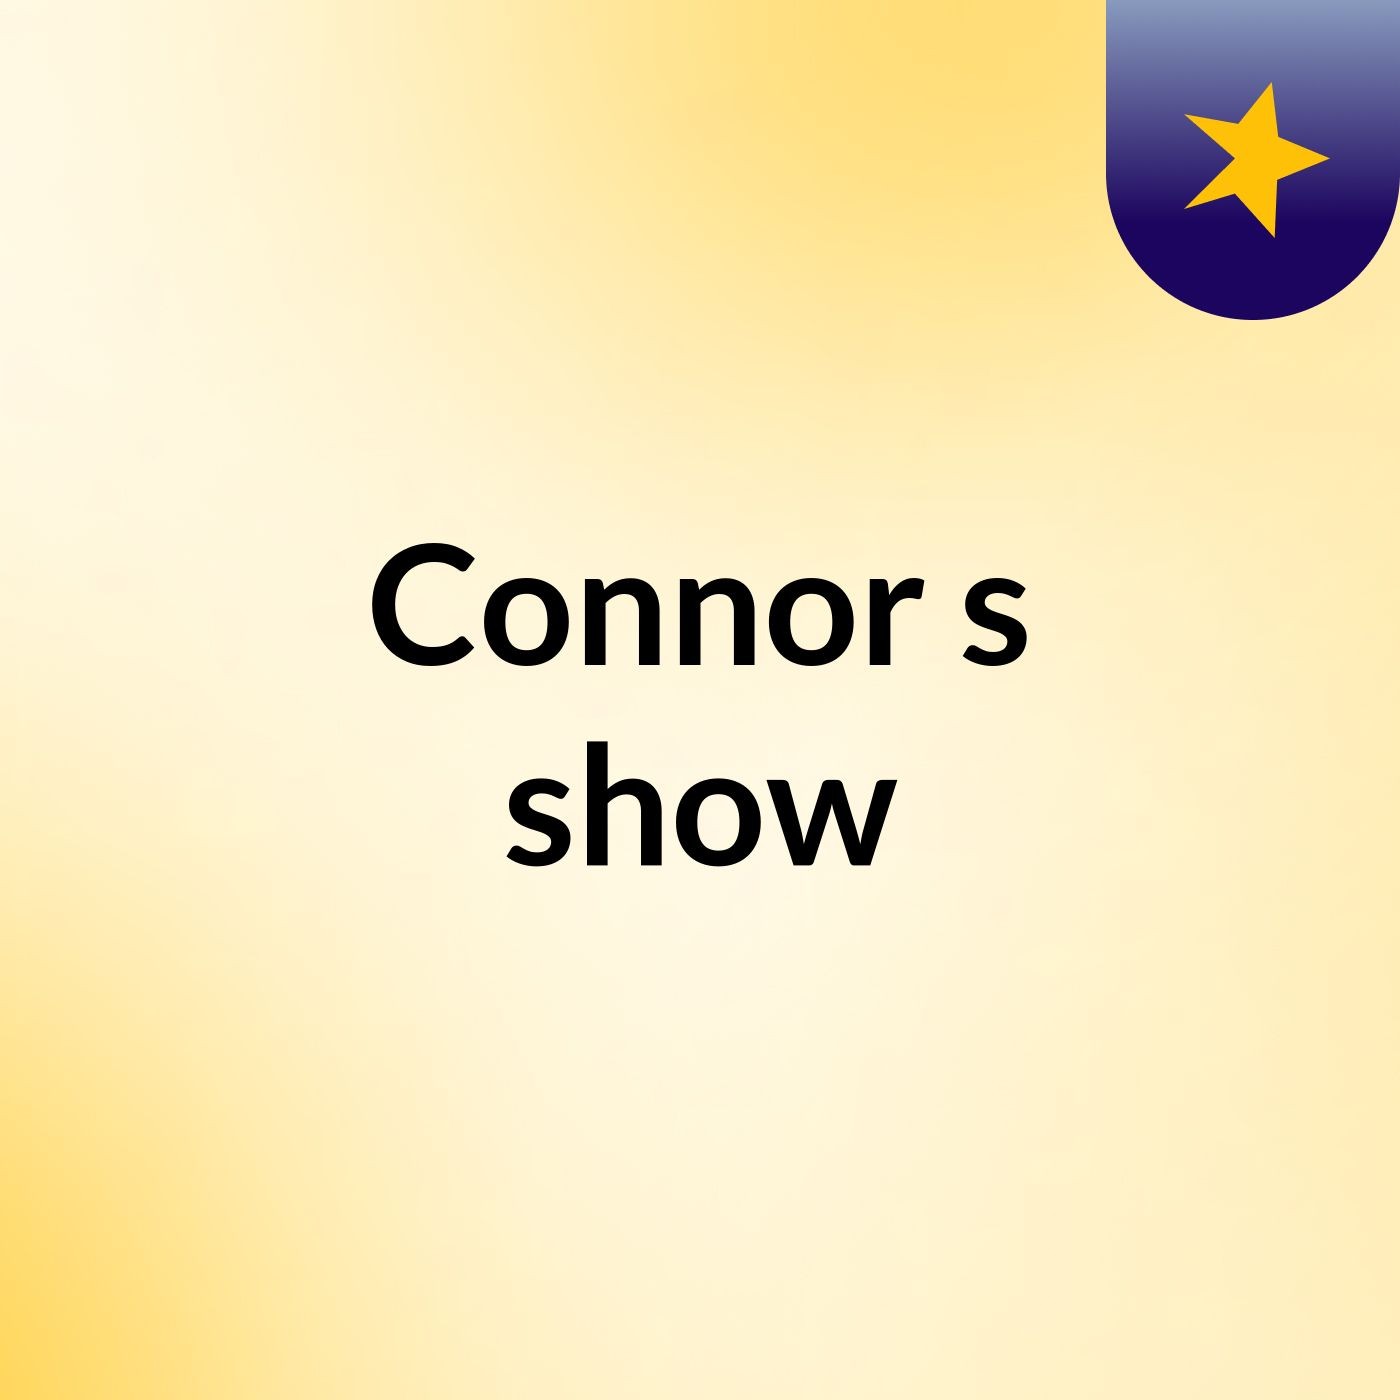 Connor's show